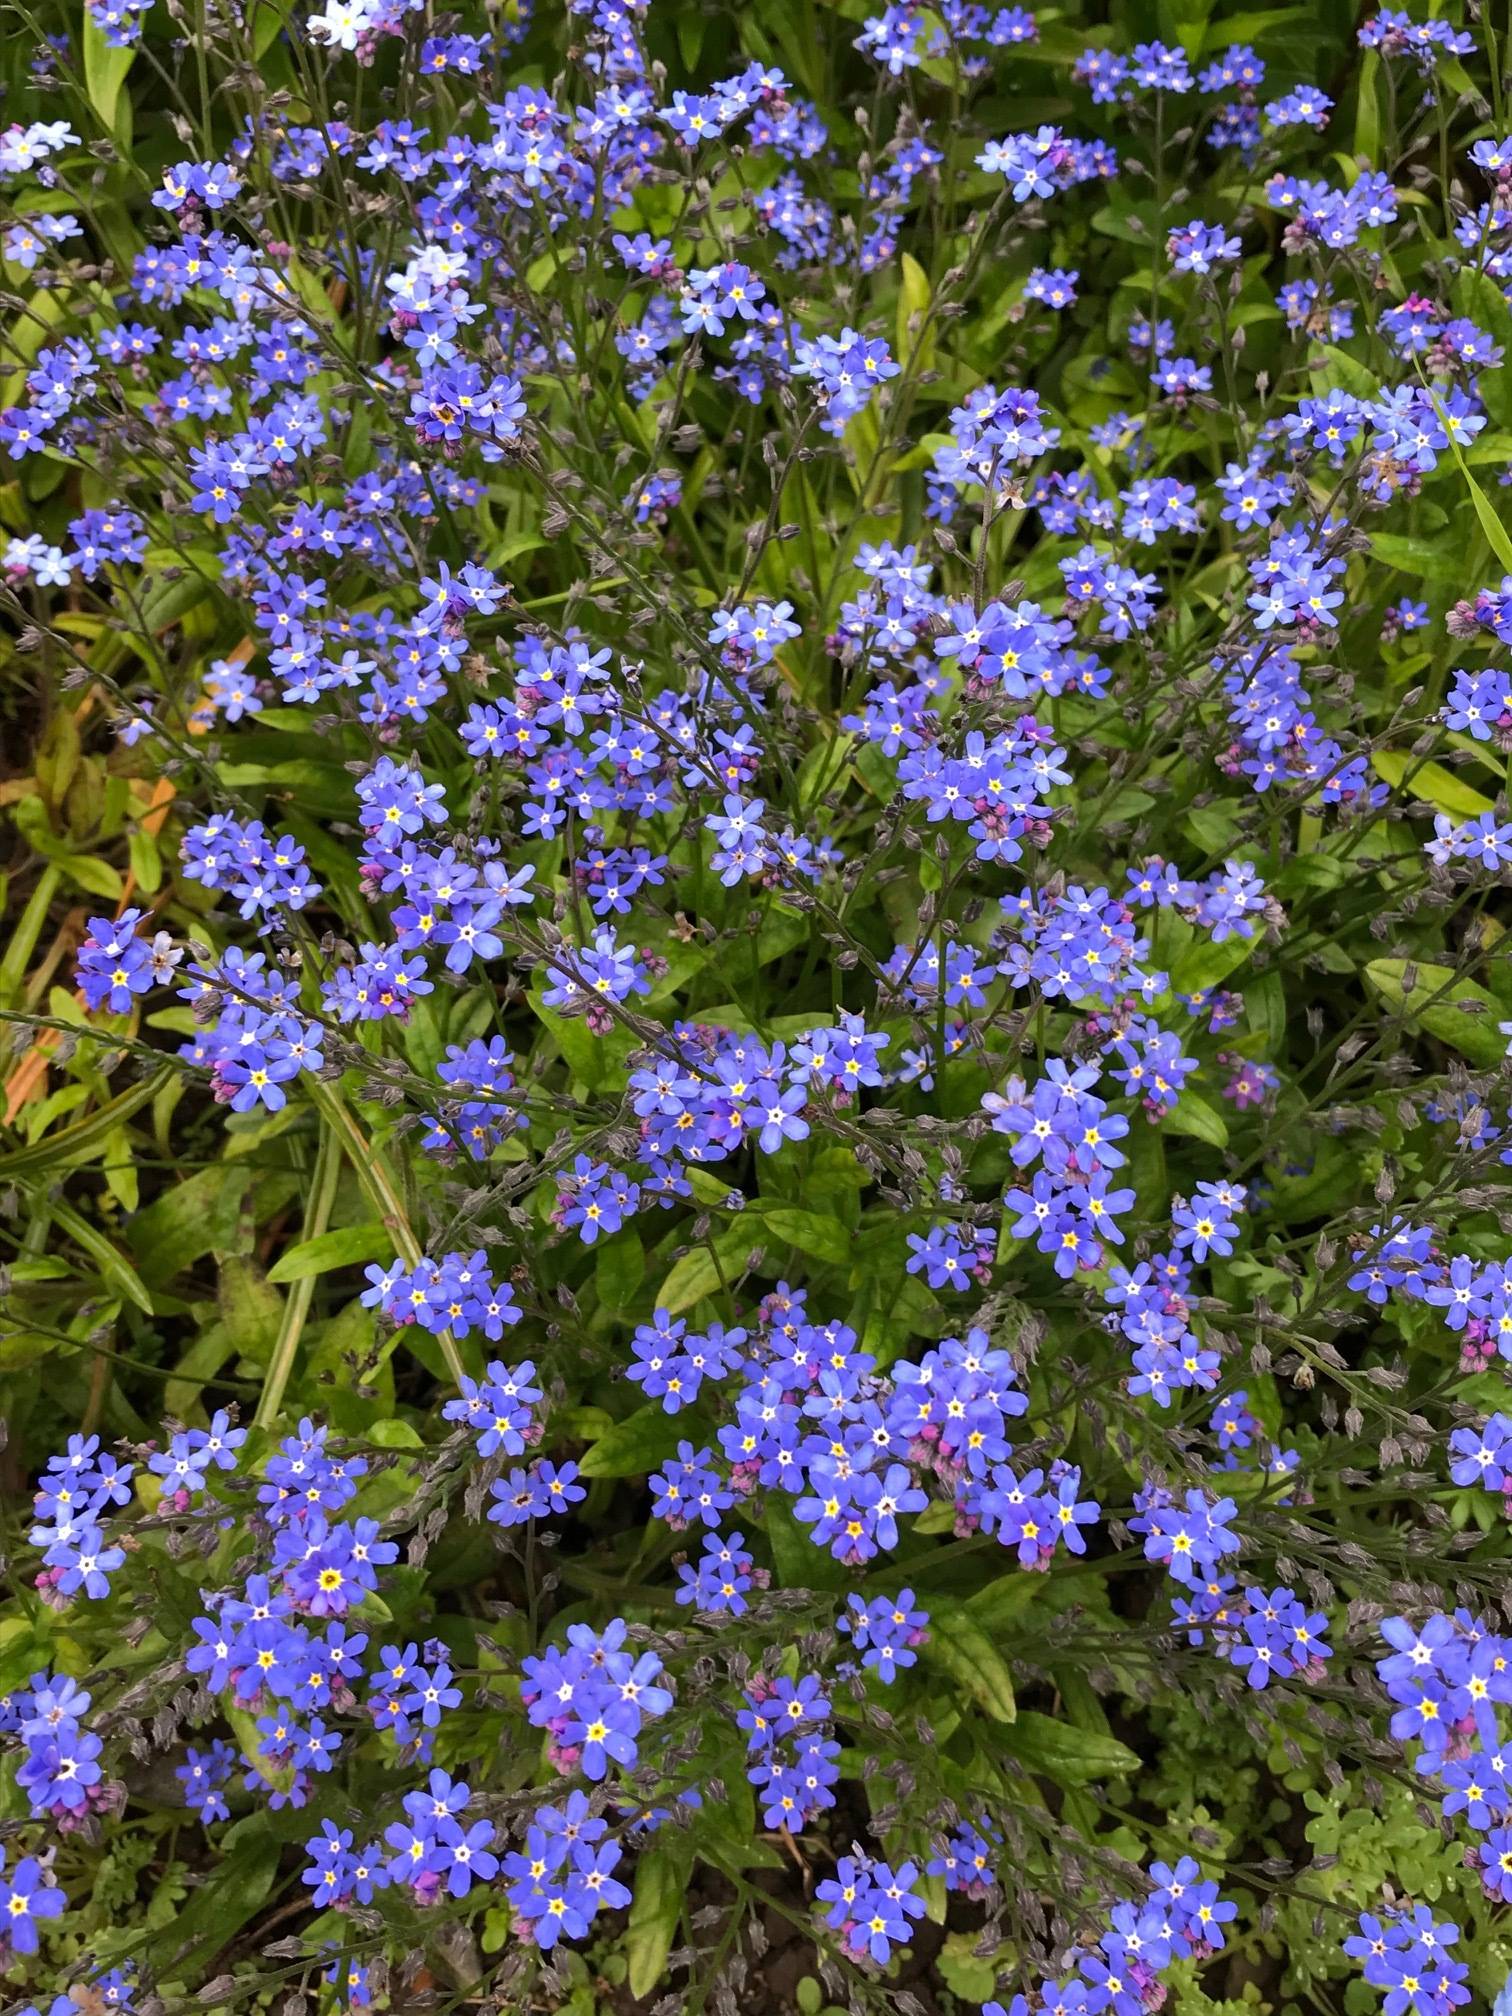 Forget-me-nots add a welcome burst of blue. (Photo by Rosemary Fitzpatrick)